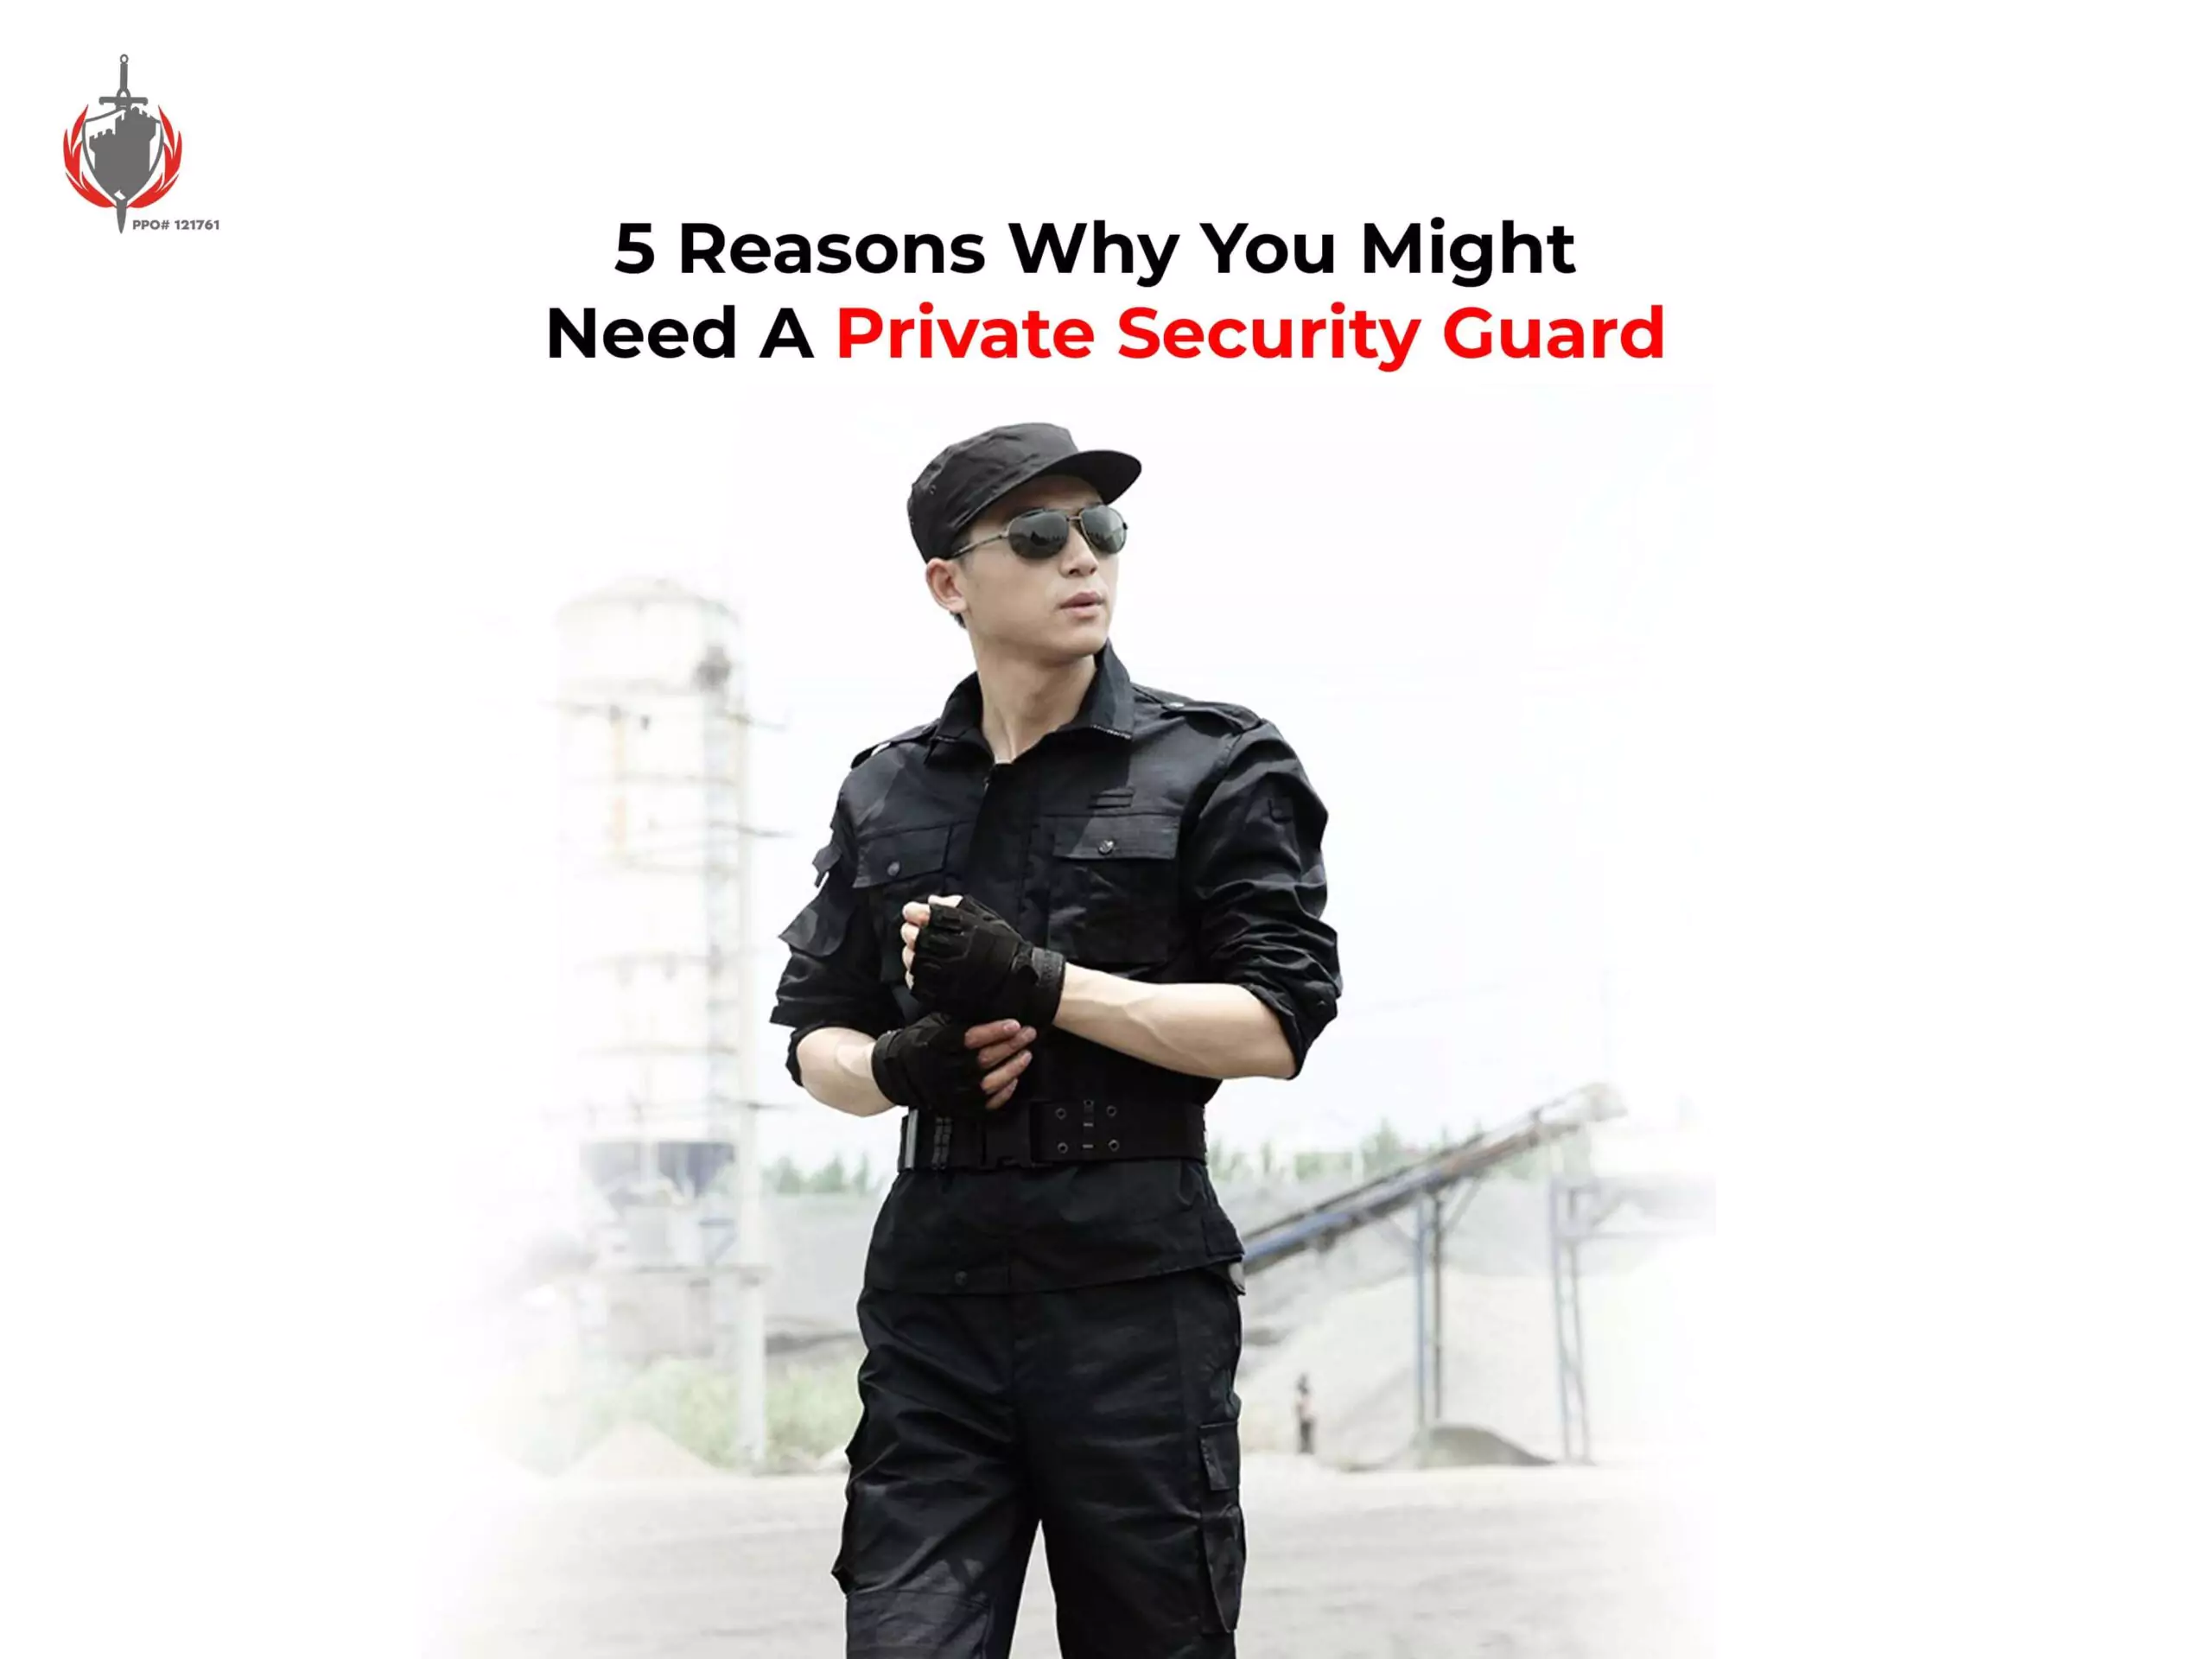 5 Reasons Why You Might Need A Private Security Guard